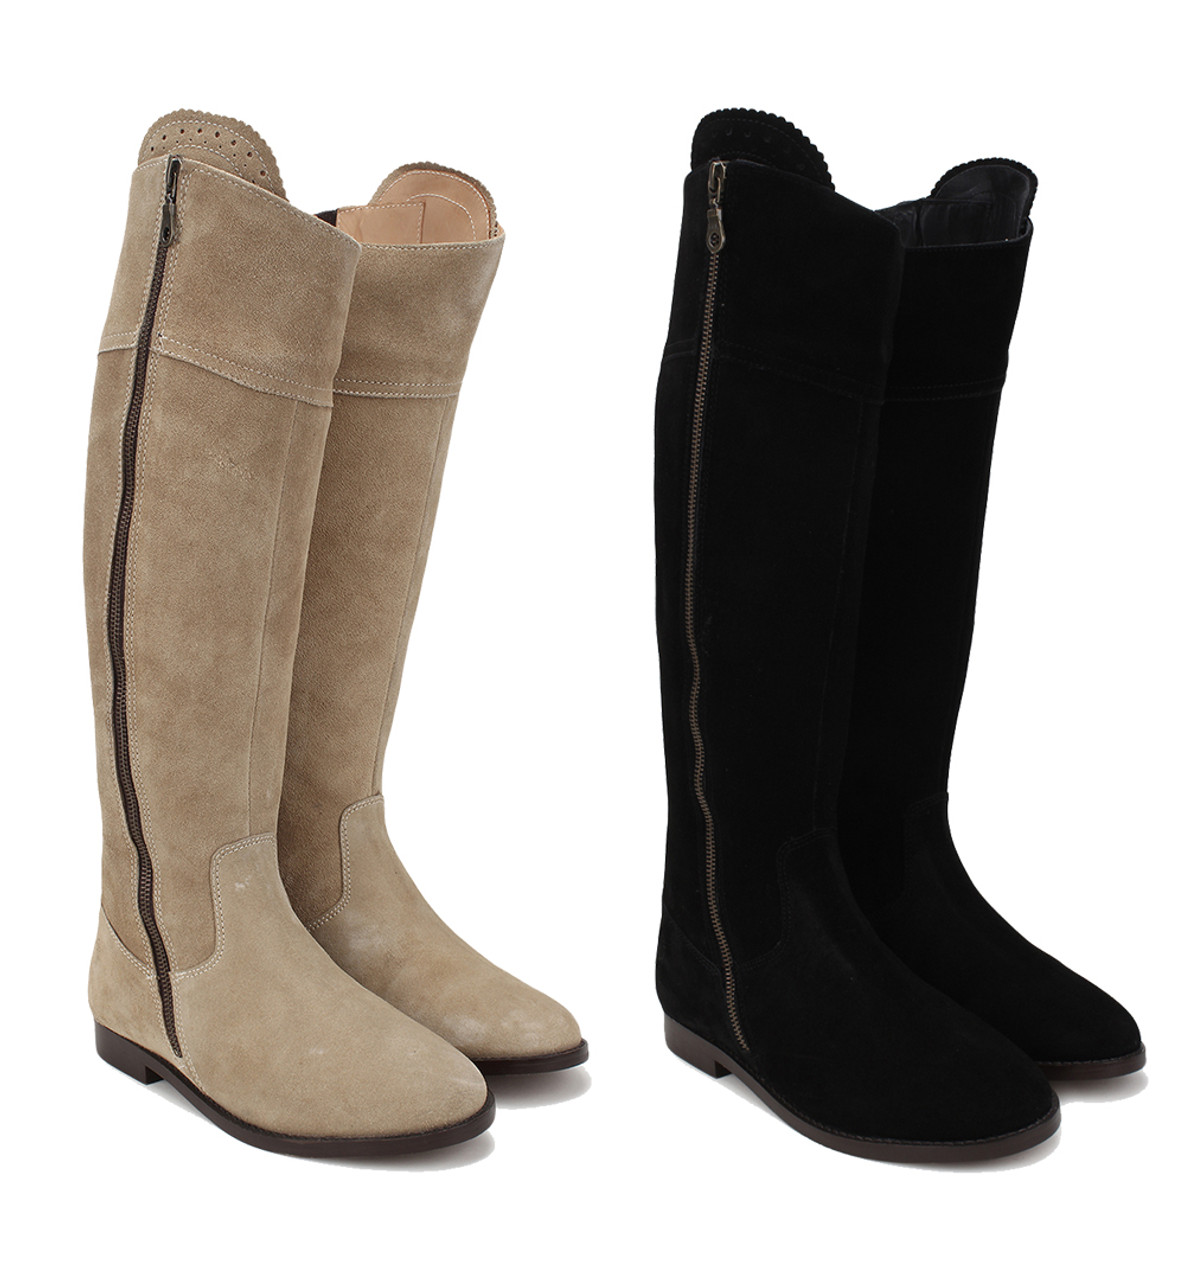 Unicorn Spanish Style Tall Boots Suede Leather Long Boots Beige Black